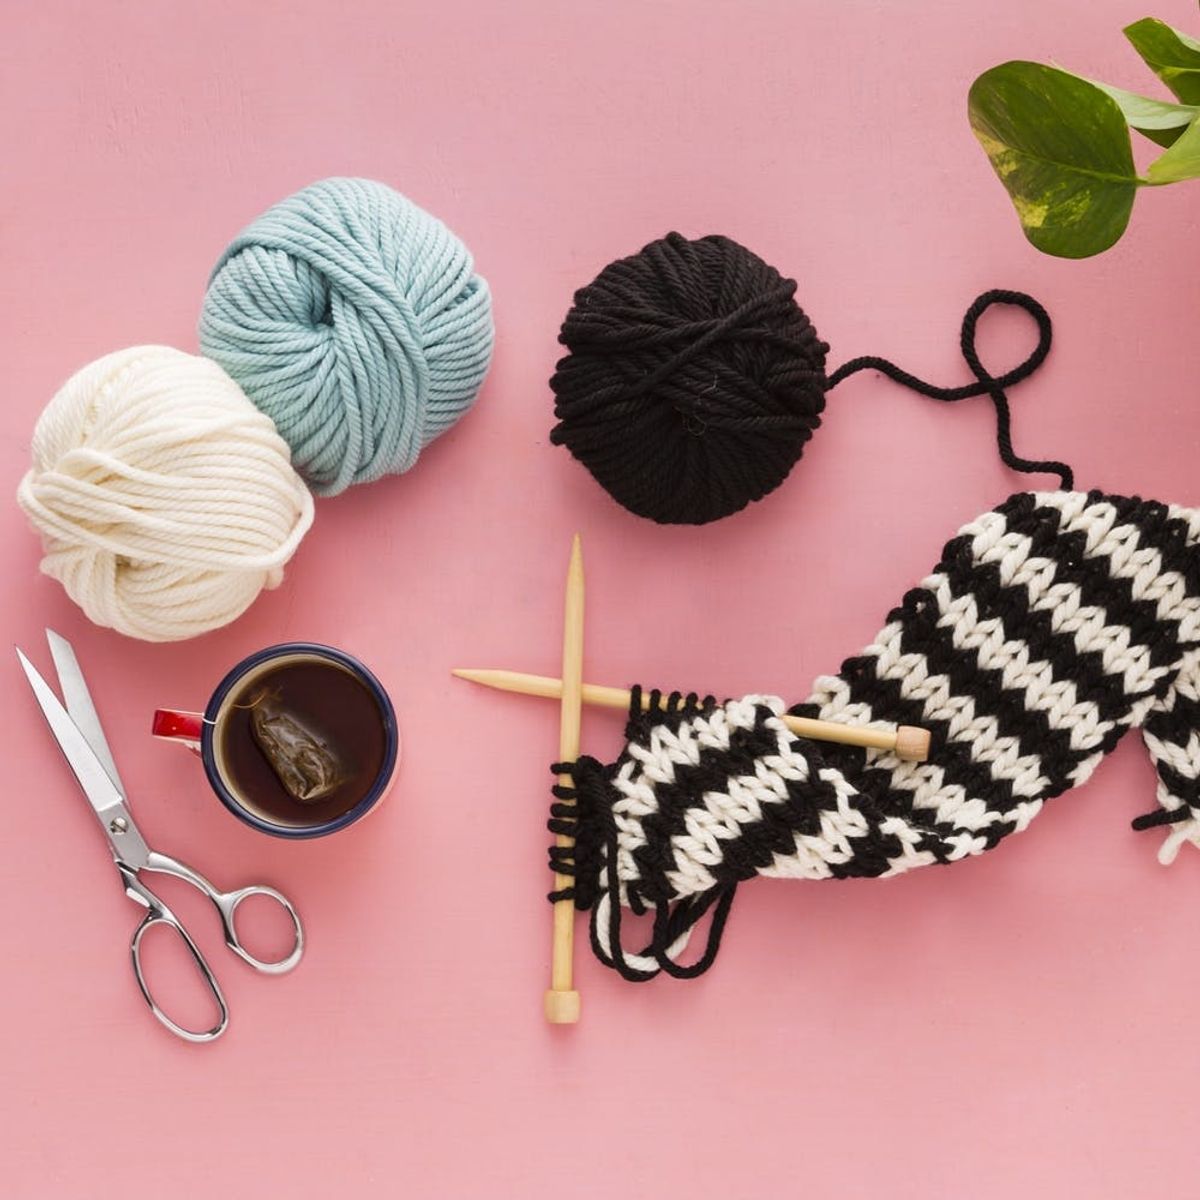 11 Quick Knits for Holiday Gifts (+ How to Get a FREE Holiday Pattern!)